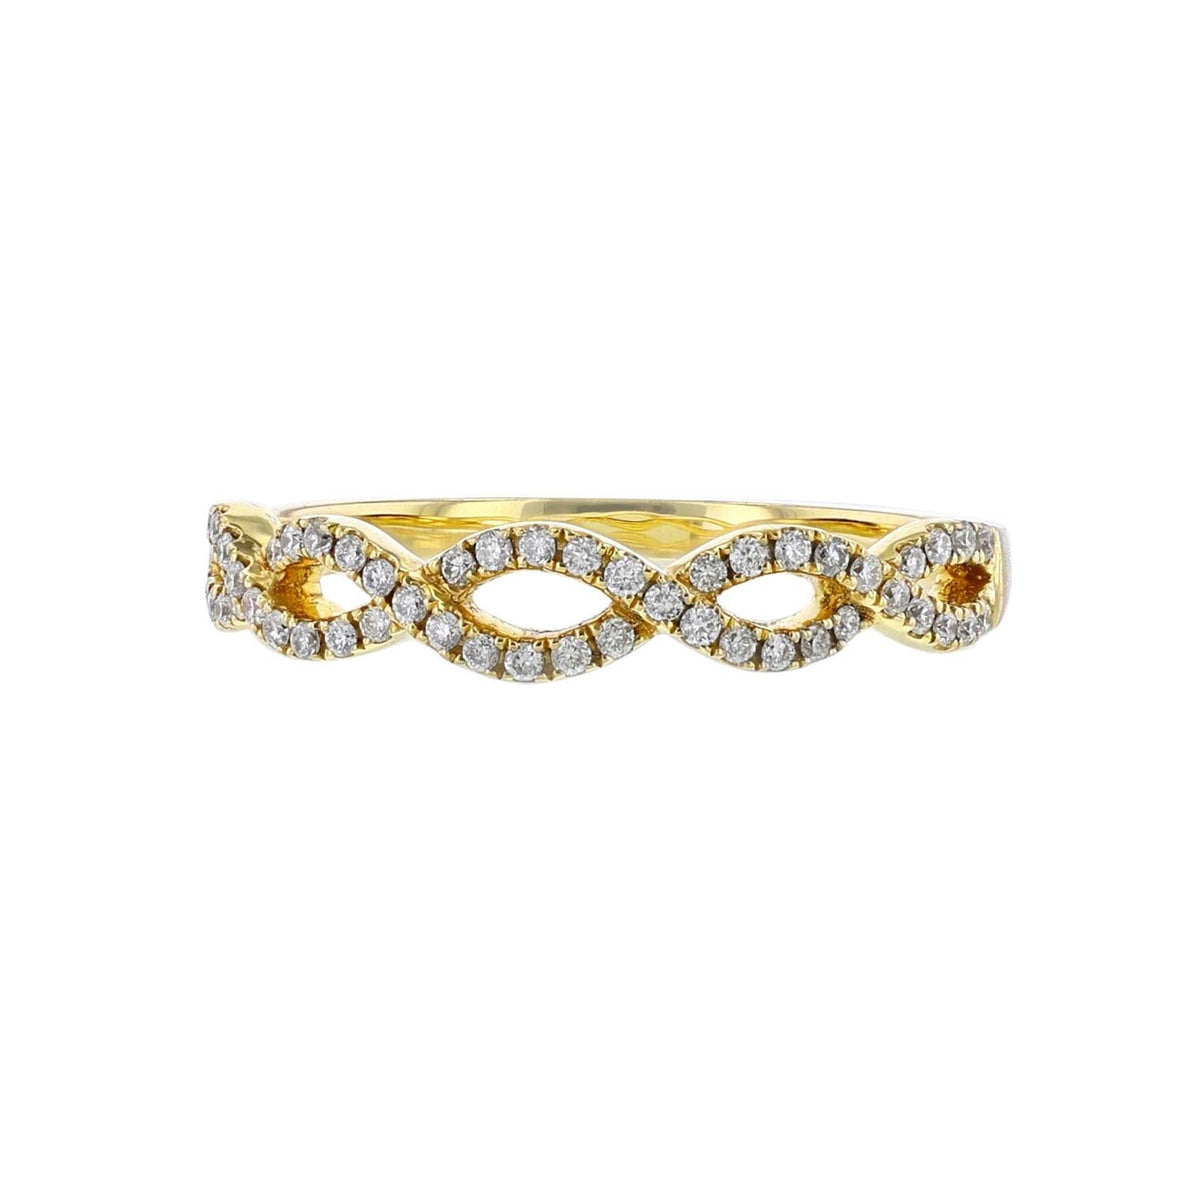 14Kt Yellow Gold Prong Set Wedding Ring With 0.27cttw Natural Diamonds